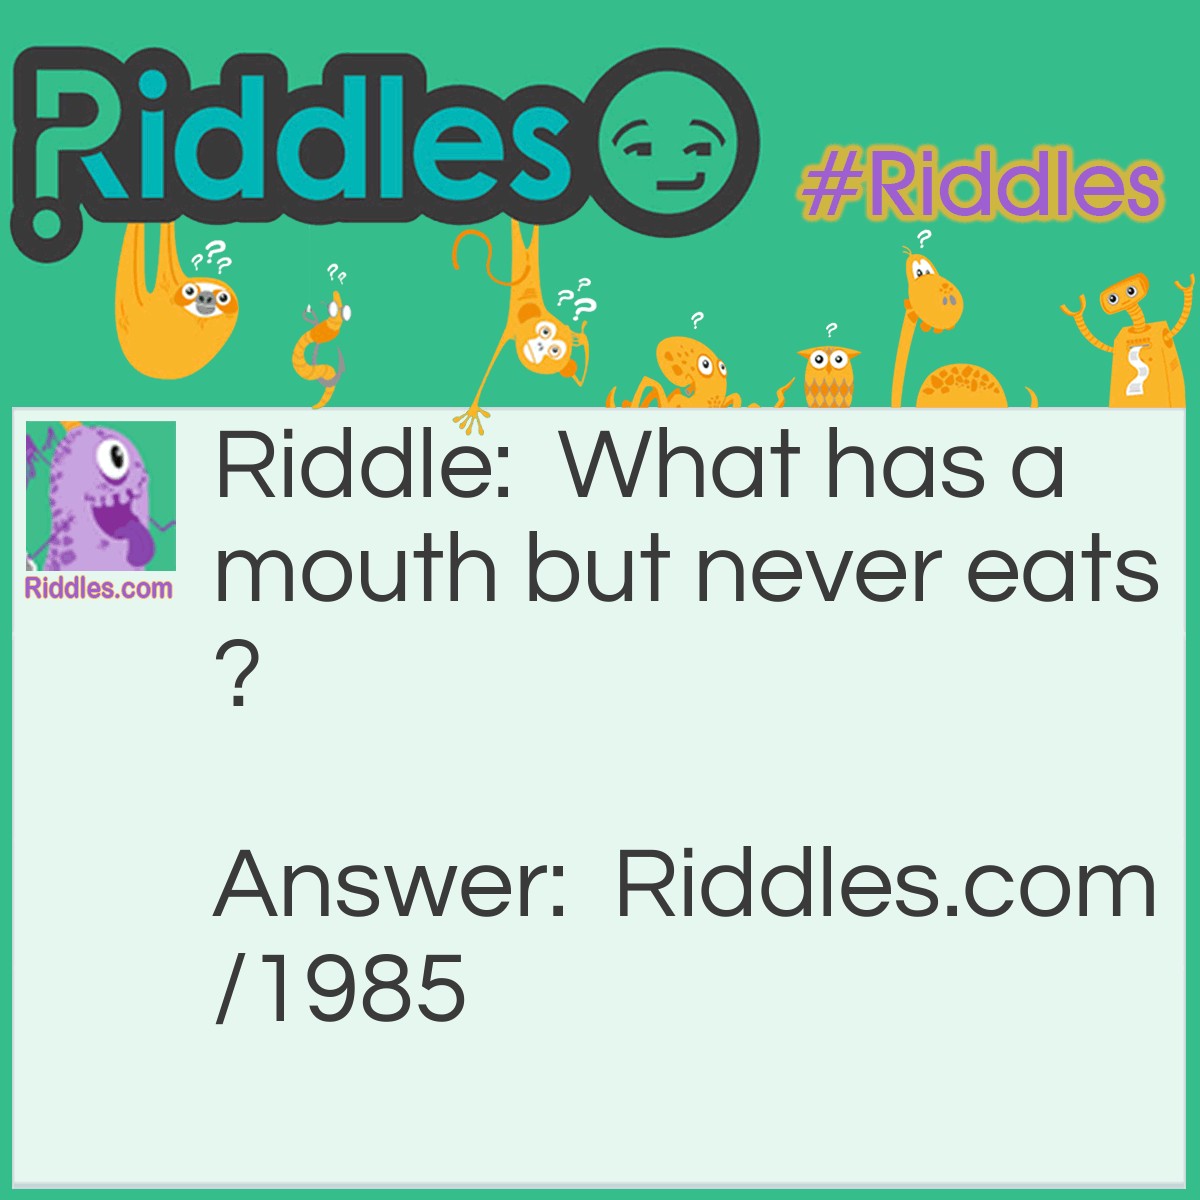 Riddle: What has a mouth but never eats? Answer: A river.